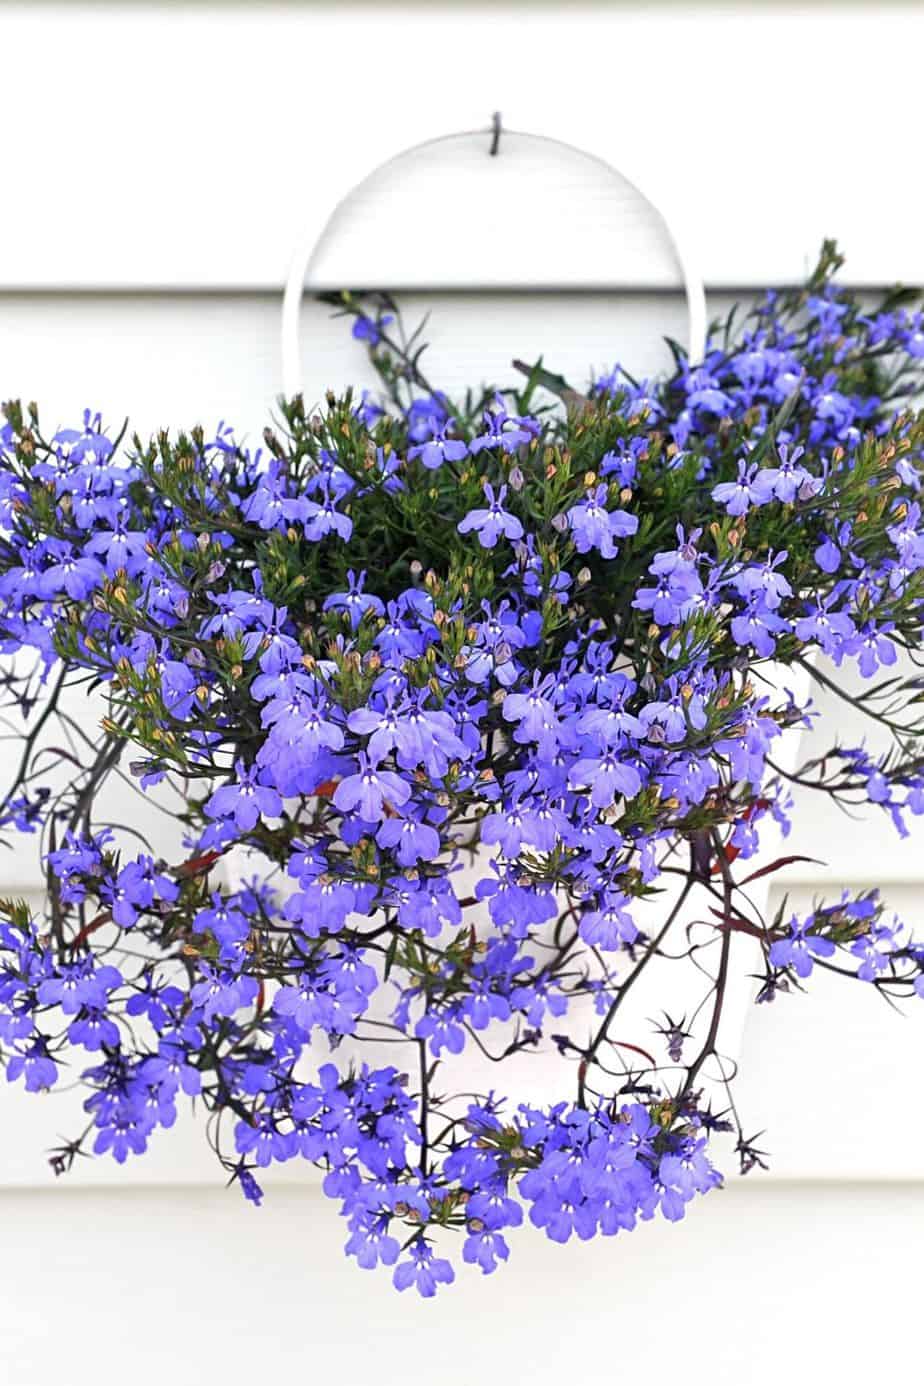 Lobelias are stunning annual plants that you can grow on an east-facing balcony